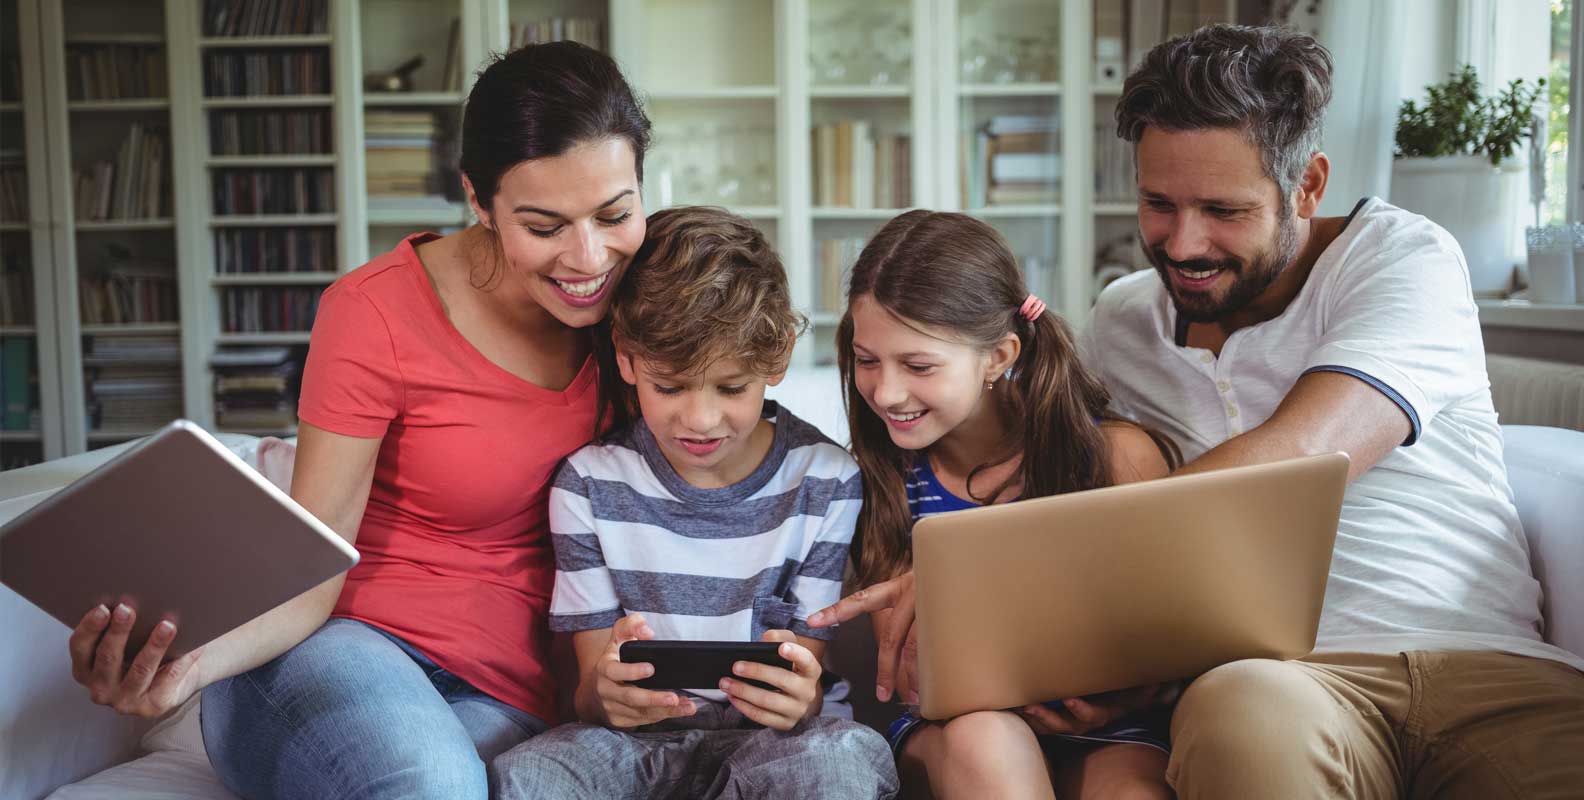 Family in home using internet on multiple devices